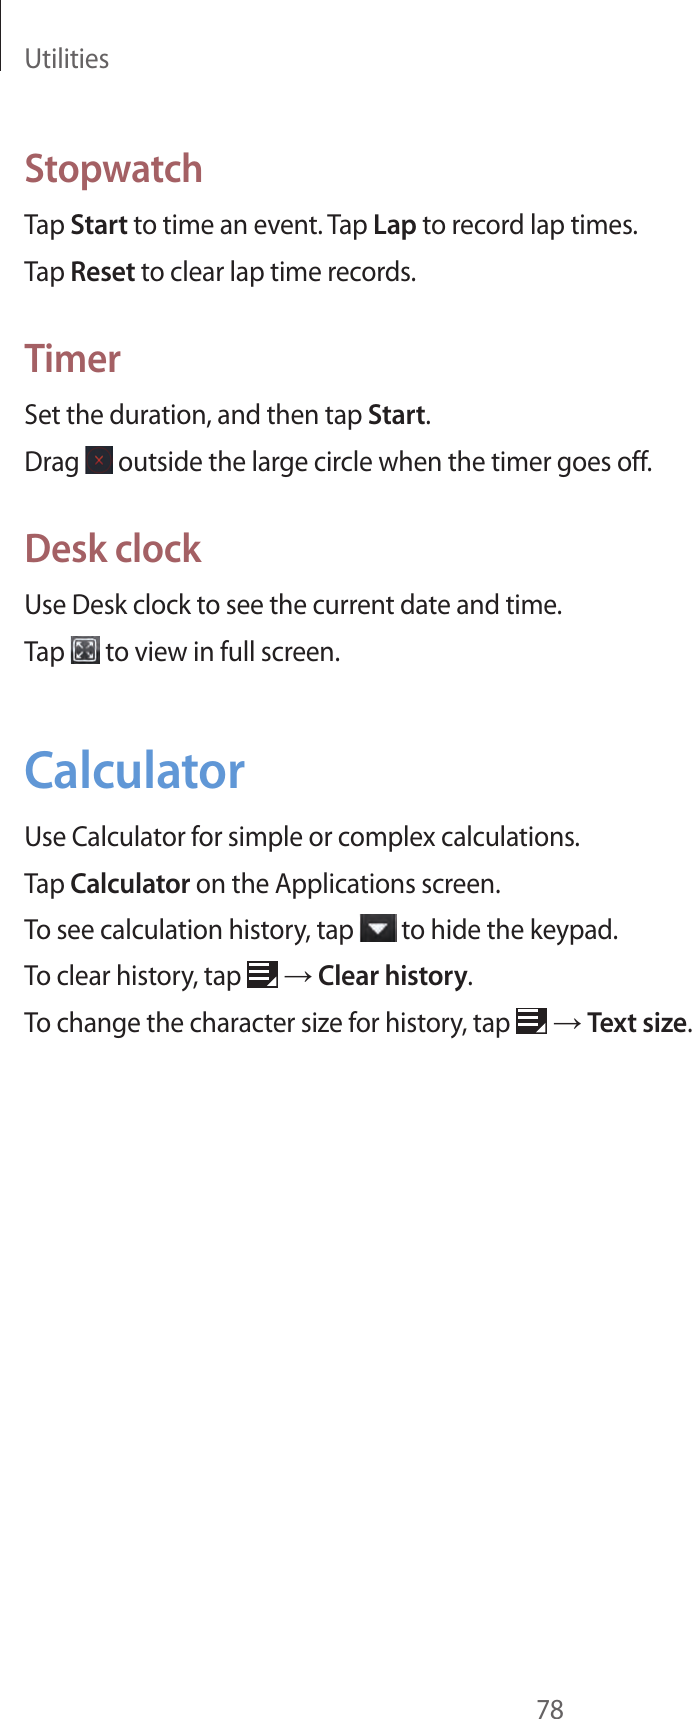 Utilities78StopwatchTap Start to time an event. Tap Lap to record lap times.Tap Reset to clear lap time records.TimerSet the duration, and then tap Start.Drag   outside the large circle when the timer goes off.Desk clockUse Desk clock to see the current date and time.Tap   to view in full screen.CalculatorUse Calculator for simple or complex calculations.Tap Calculator on the Applications screen.To see calculation history, tap   to hide the keypad. To clear history, tap   → Clear history.To change the character size for history, tap   → Text size.